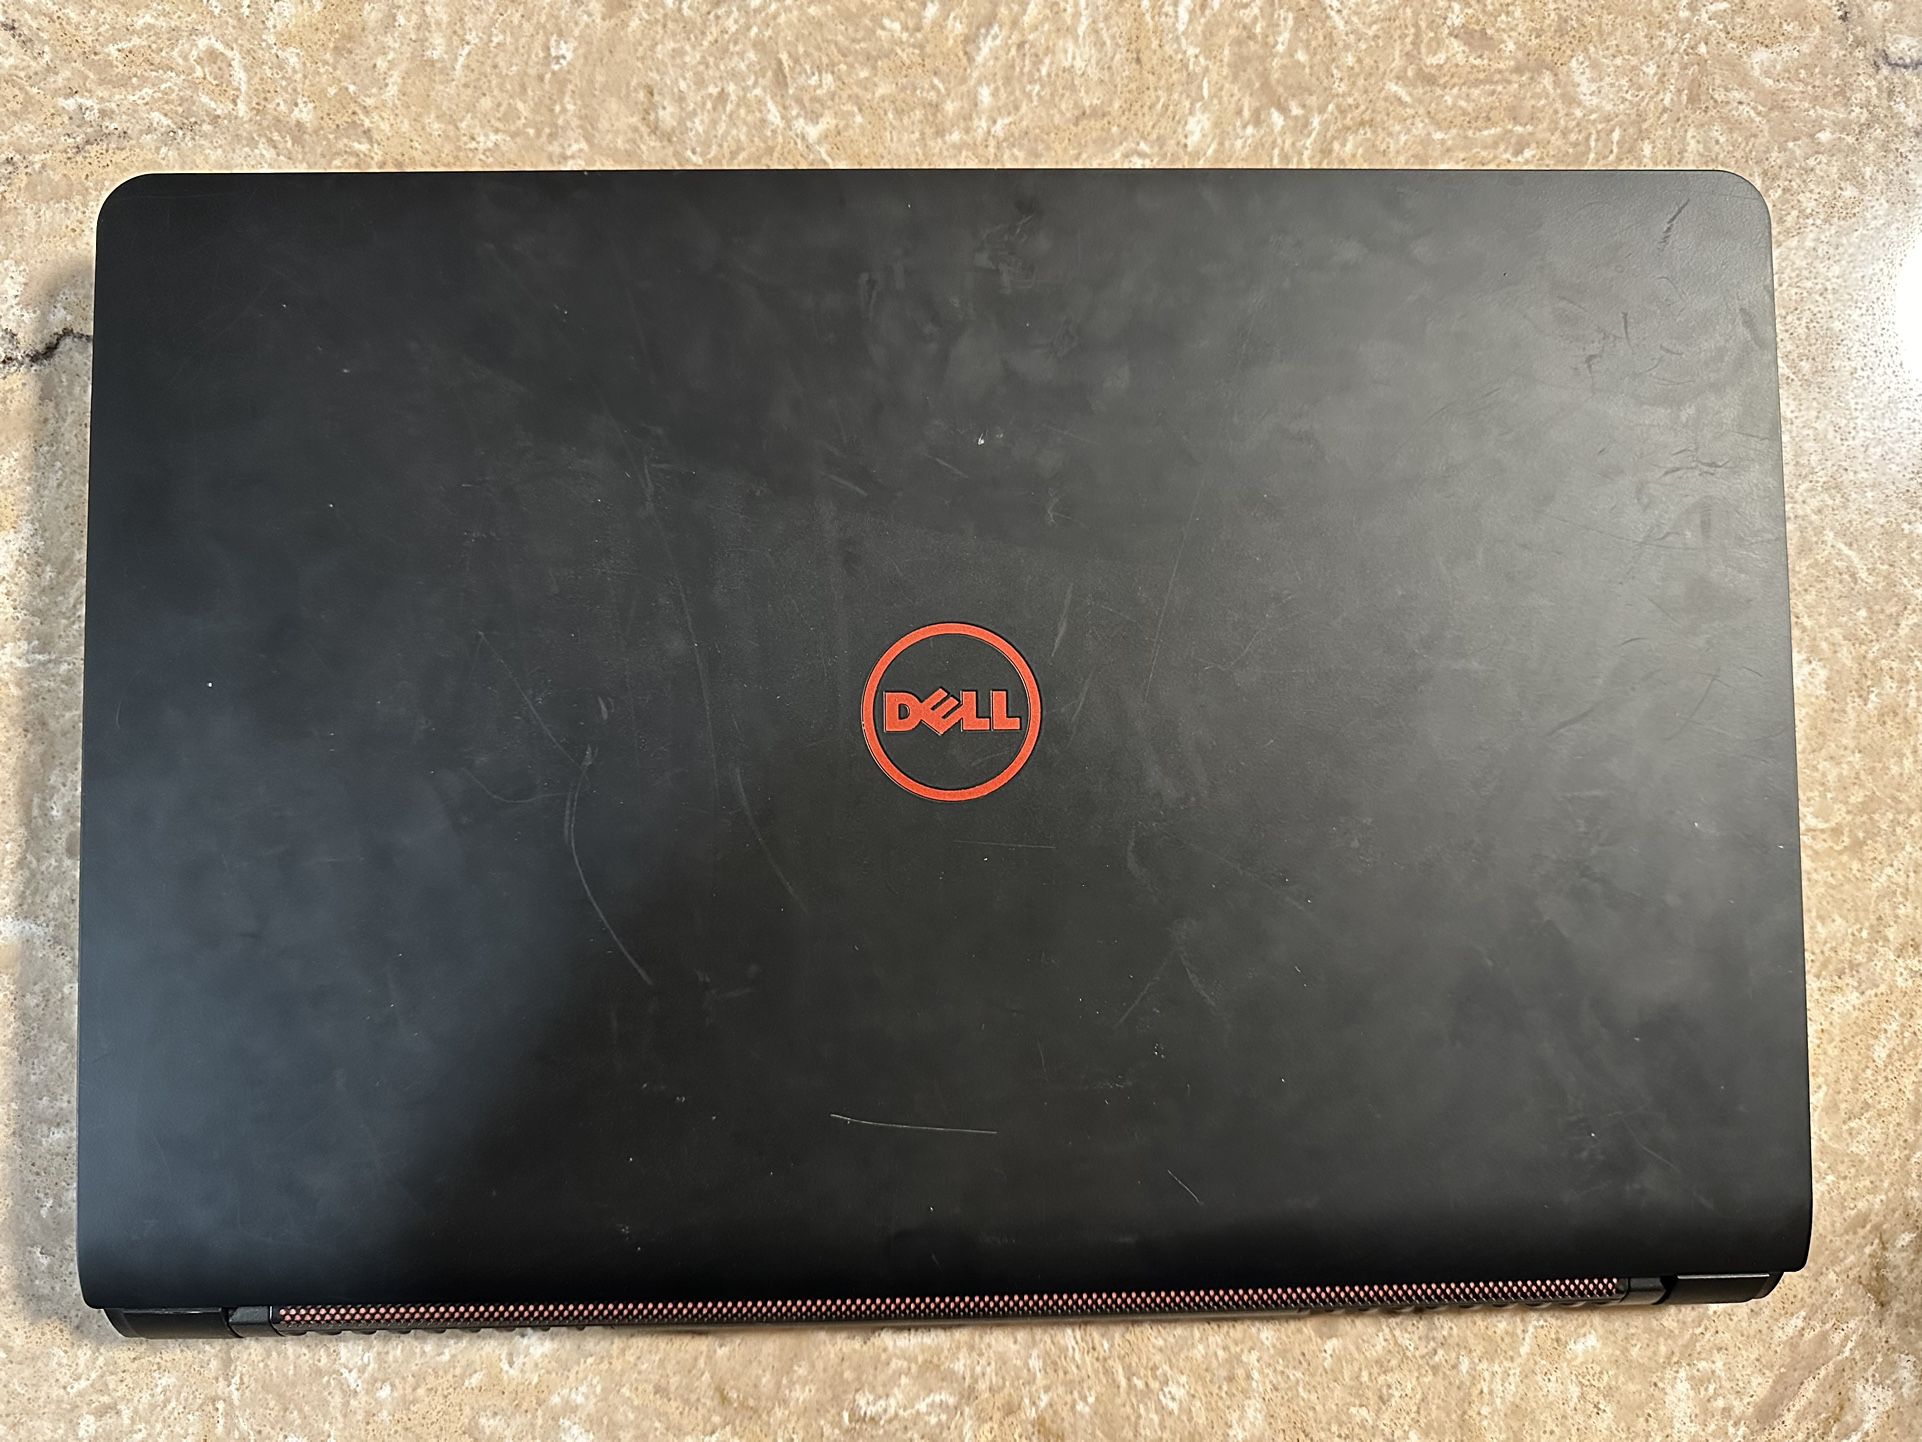 Dell Inspiron 15 7000 Series Laptop